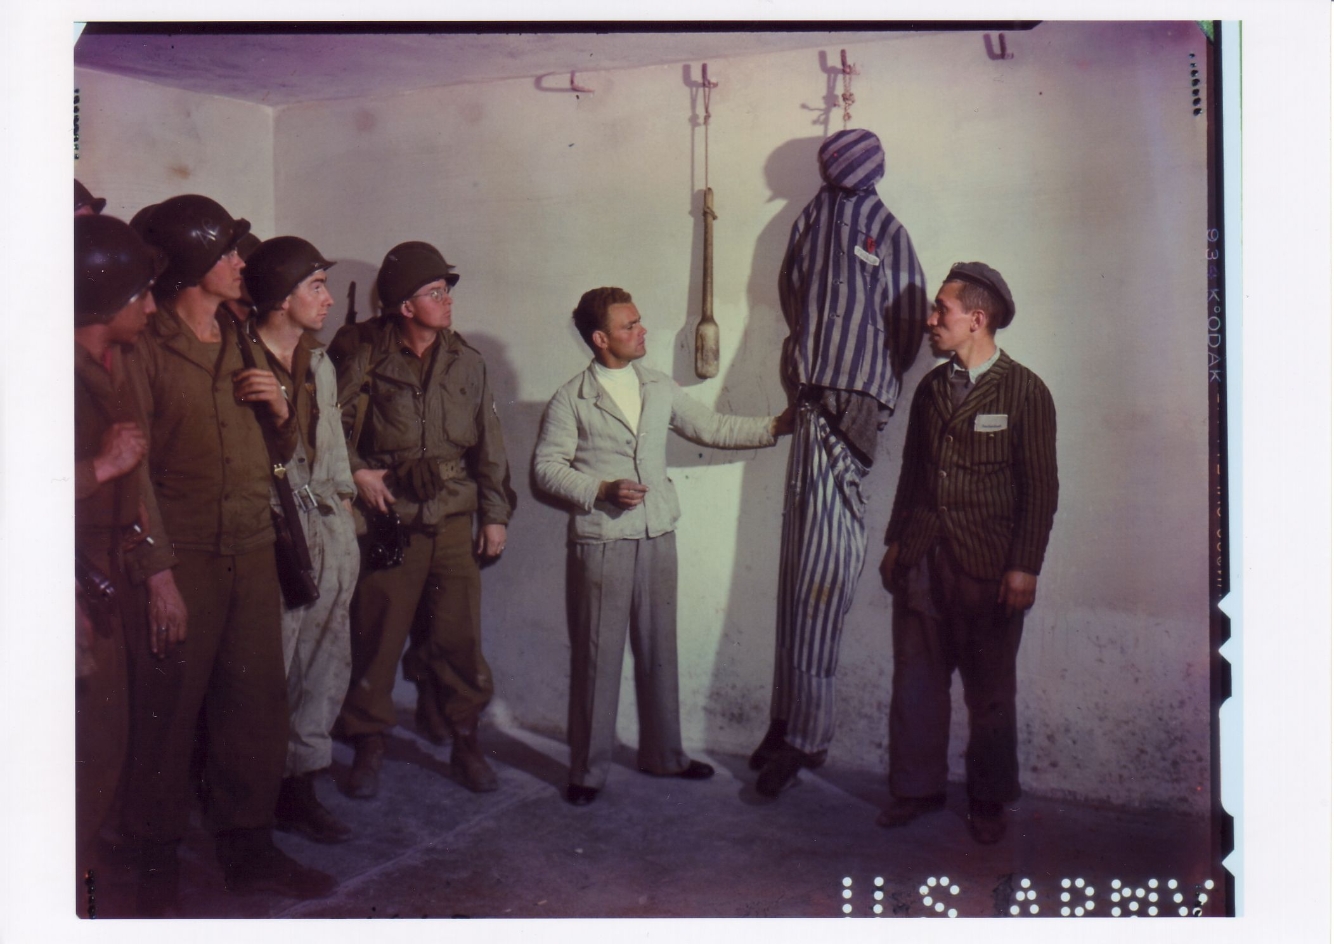 On the left is a group of American soldiers watching the demonstration. In the center of the picture, a former prisoner stands in front of a doll in prisoner's clothing hung on a wall hook and makes an explanatory gesture. On the right, another former prisoner is speaking to the American soldiers.